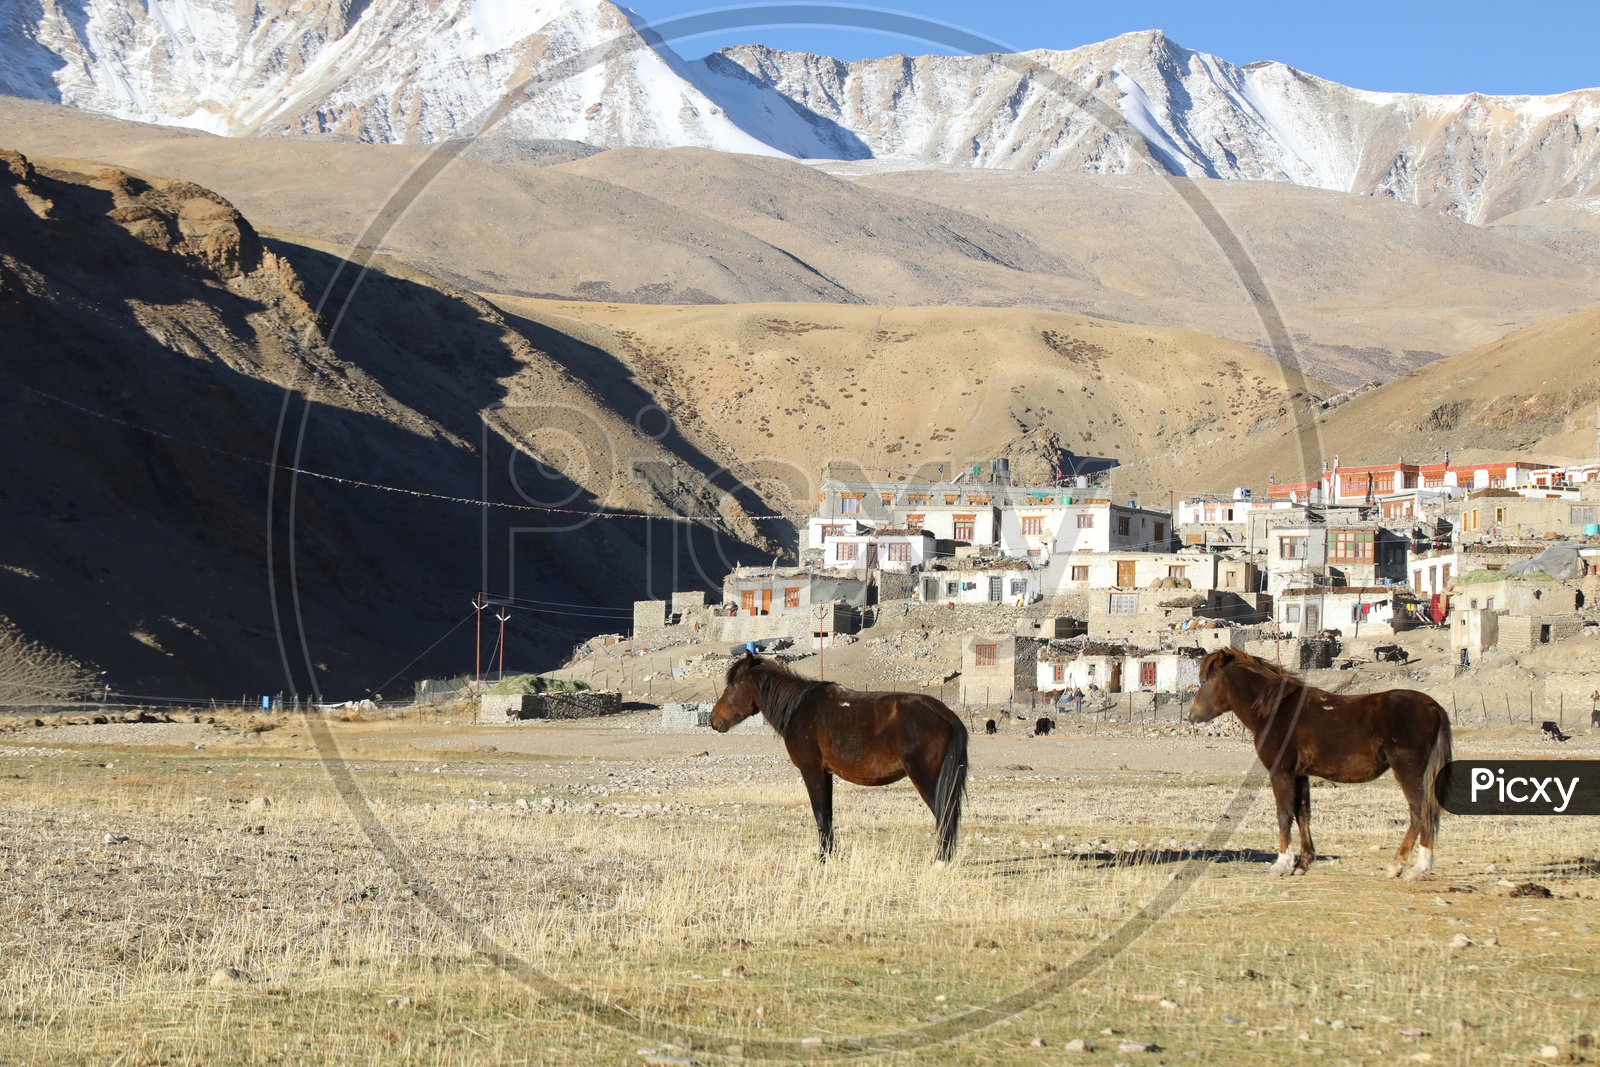 Snow capped mountains of Leh with houses and animals in the foreground